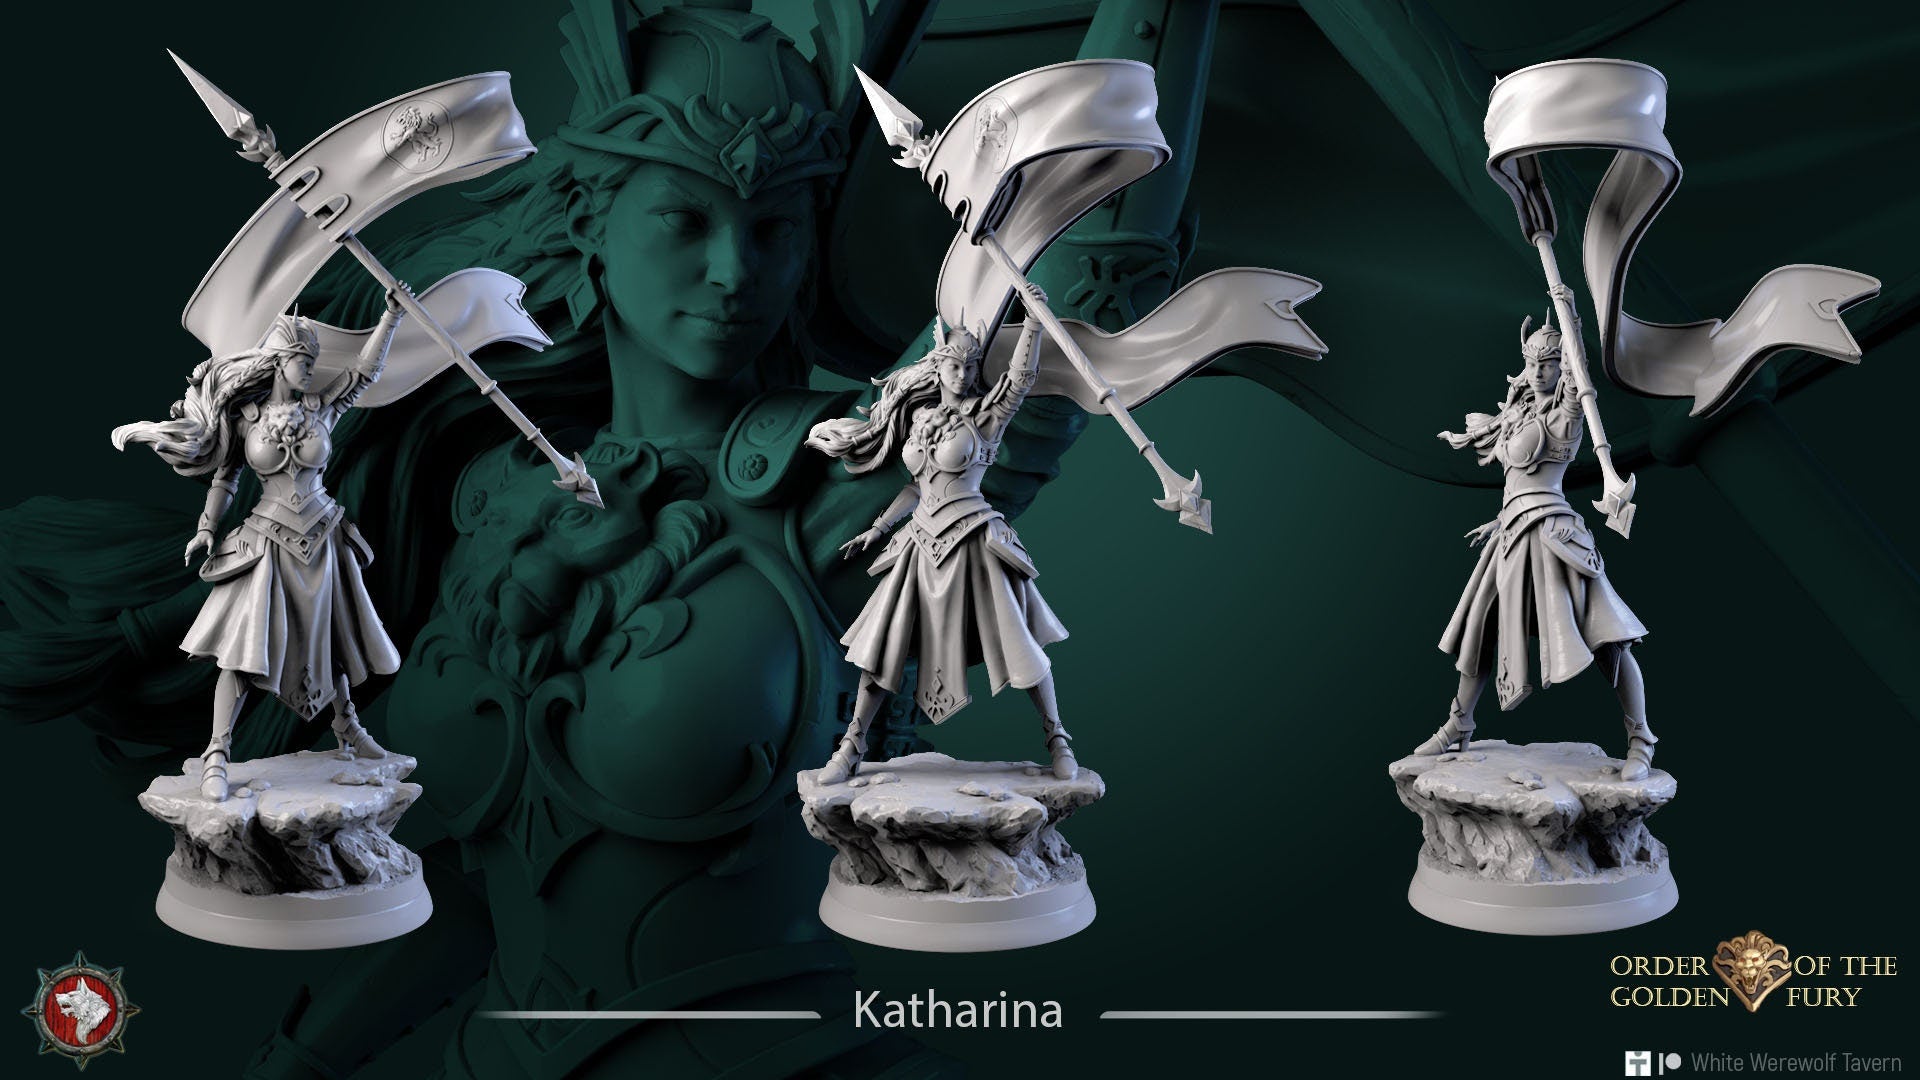 Katharina | Order Of The Golden Fury | Multiple Scales | Resin 3D Printed Miniature | White Werewolf Tavern | RPG | D&D | DnD